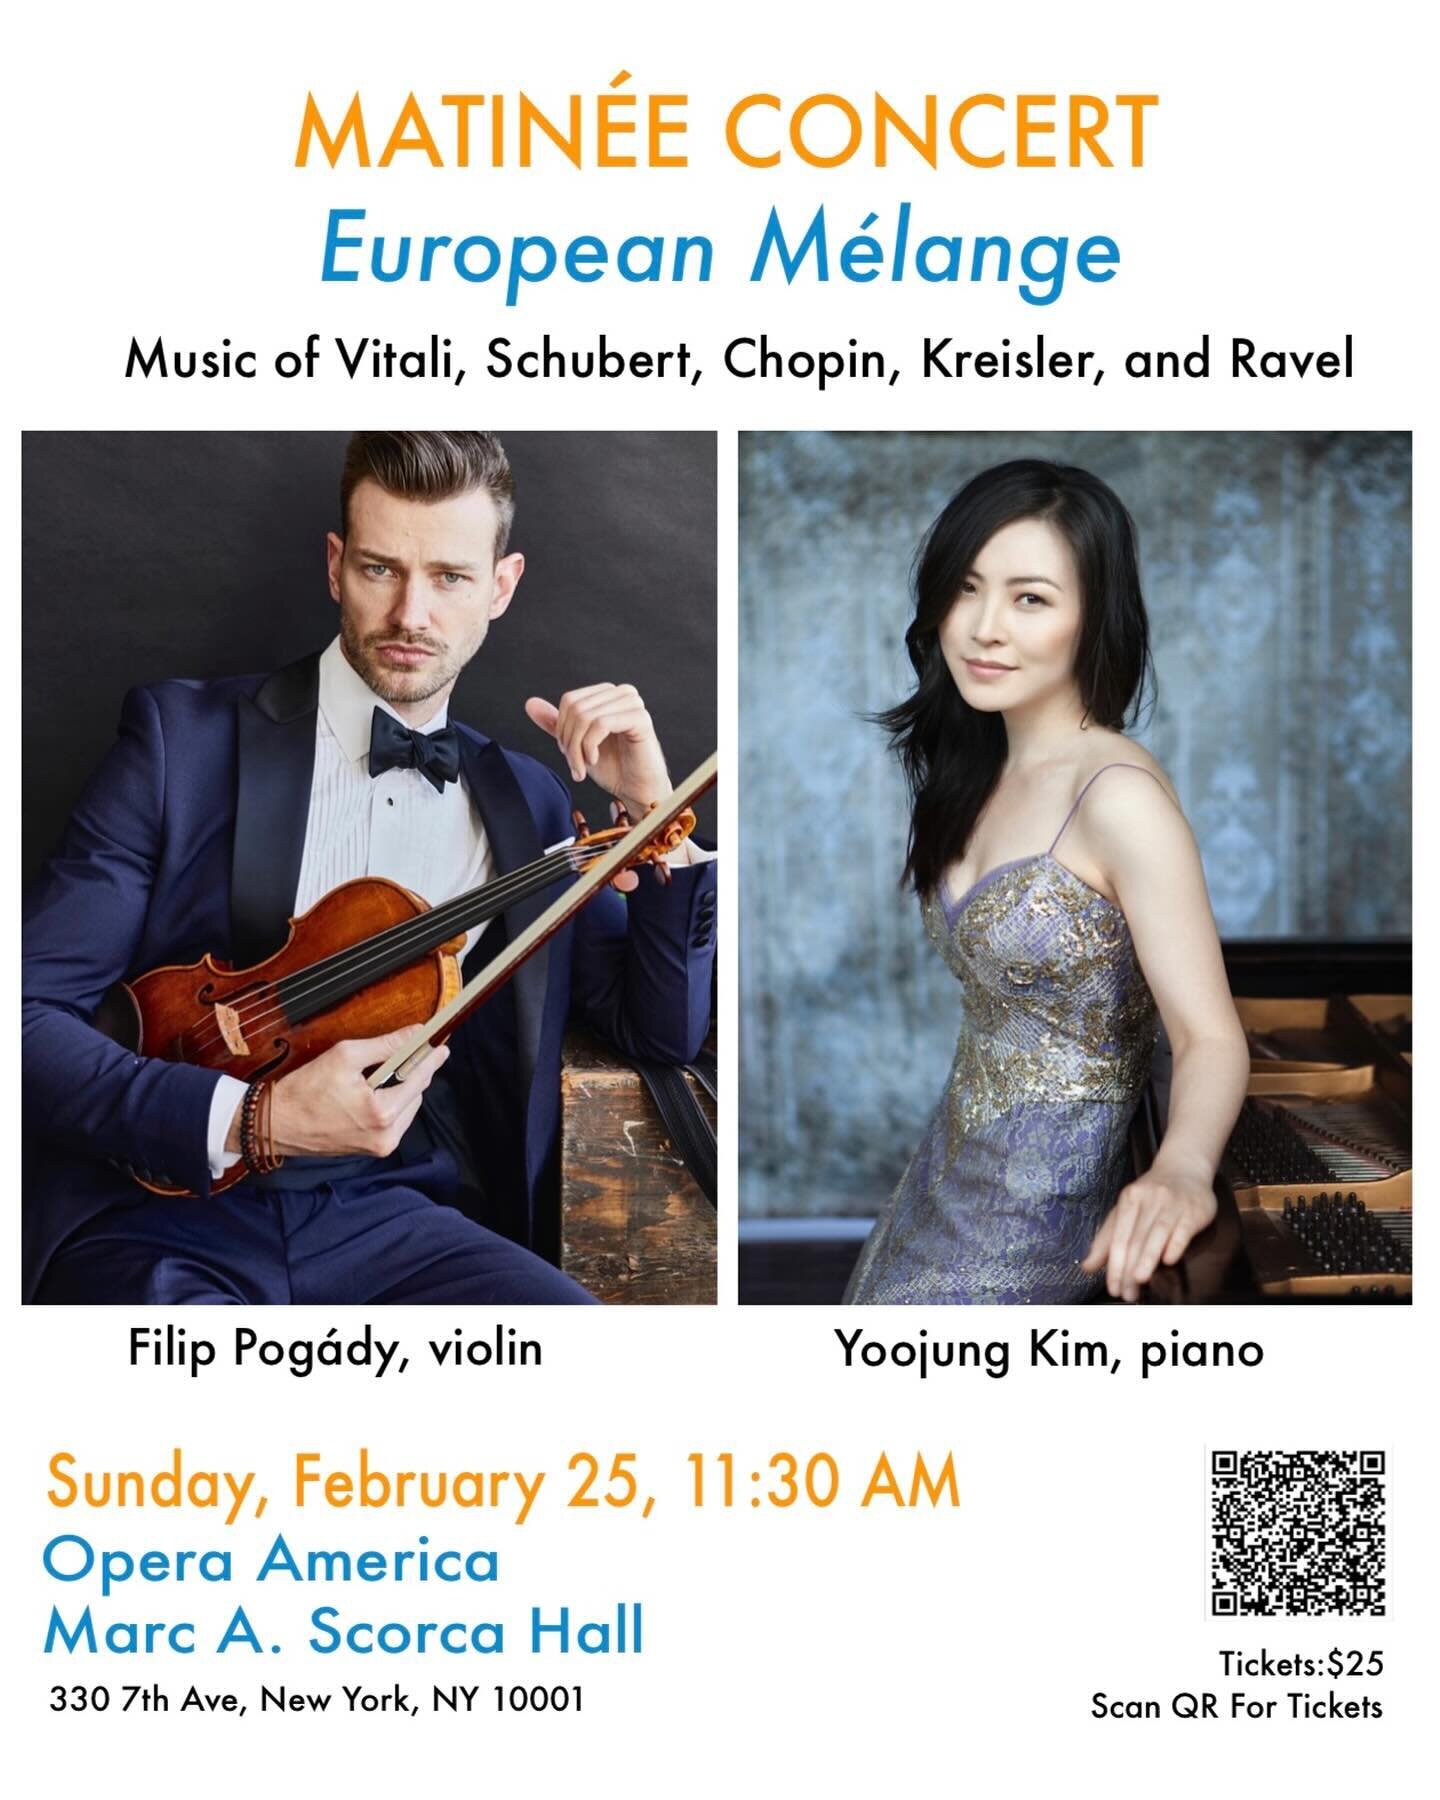 🎶 Don&rsquo;t you just love a relaxing Sunday morning? Come join me and fabulous Filip Pogady for morning coffee and wonderful music at the Martinee Concert! ☀️🎹 🎻 ☕️ 
.
.
.
#Sunday #Morning #music #MartineeConcert #nyc #manhattan #filippogady #pi